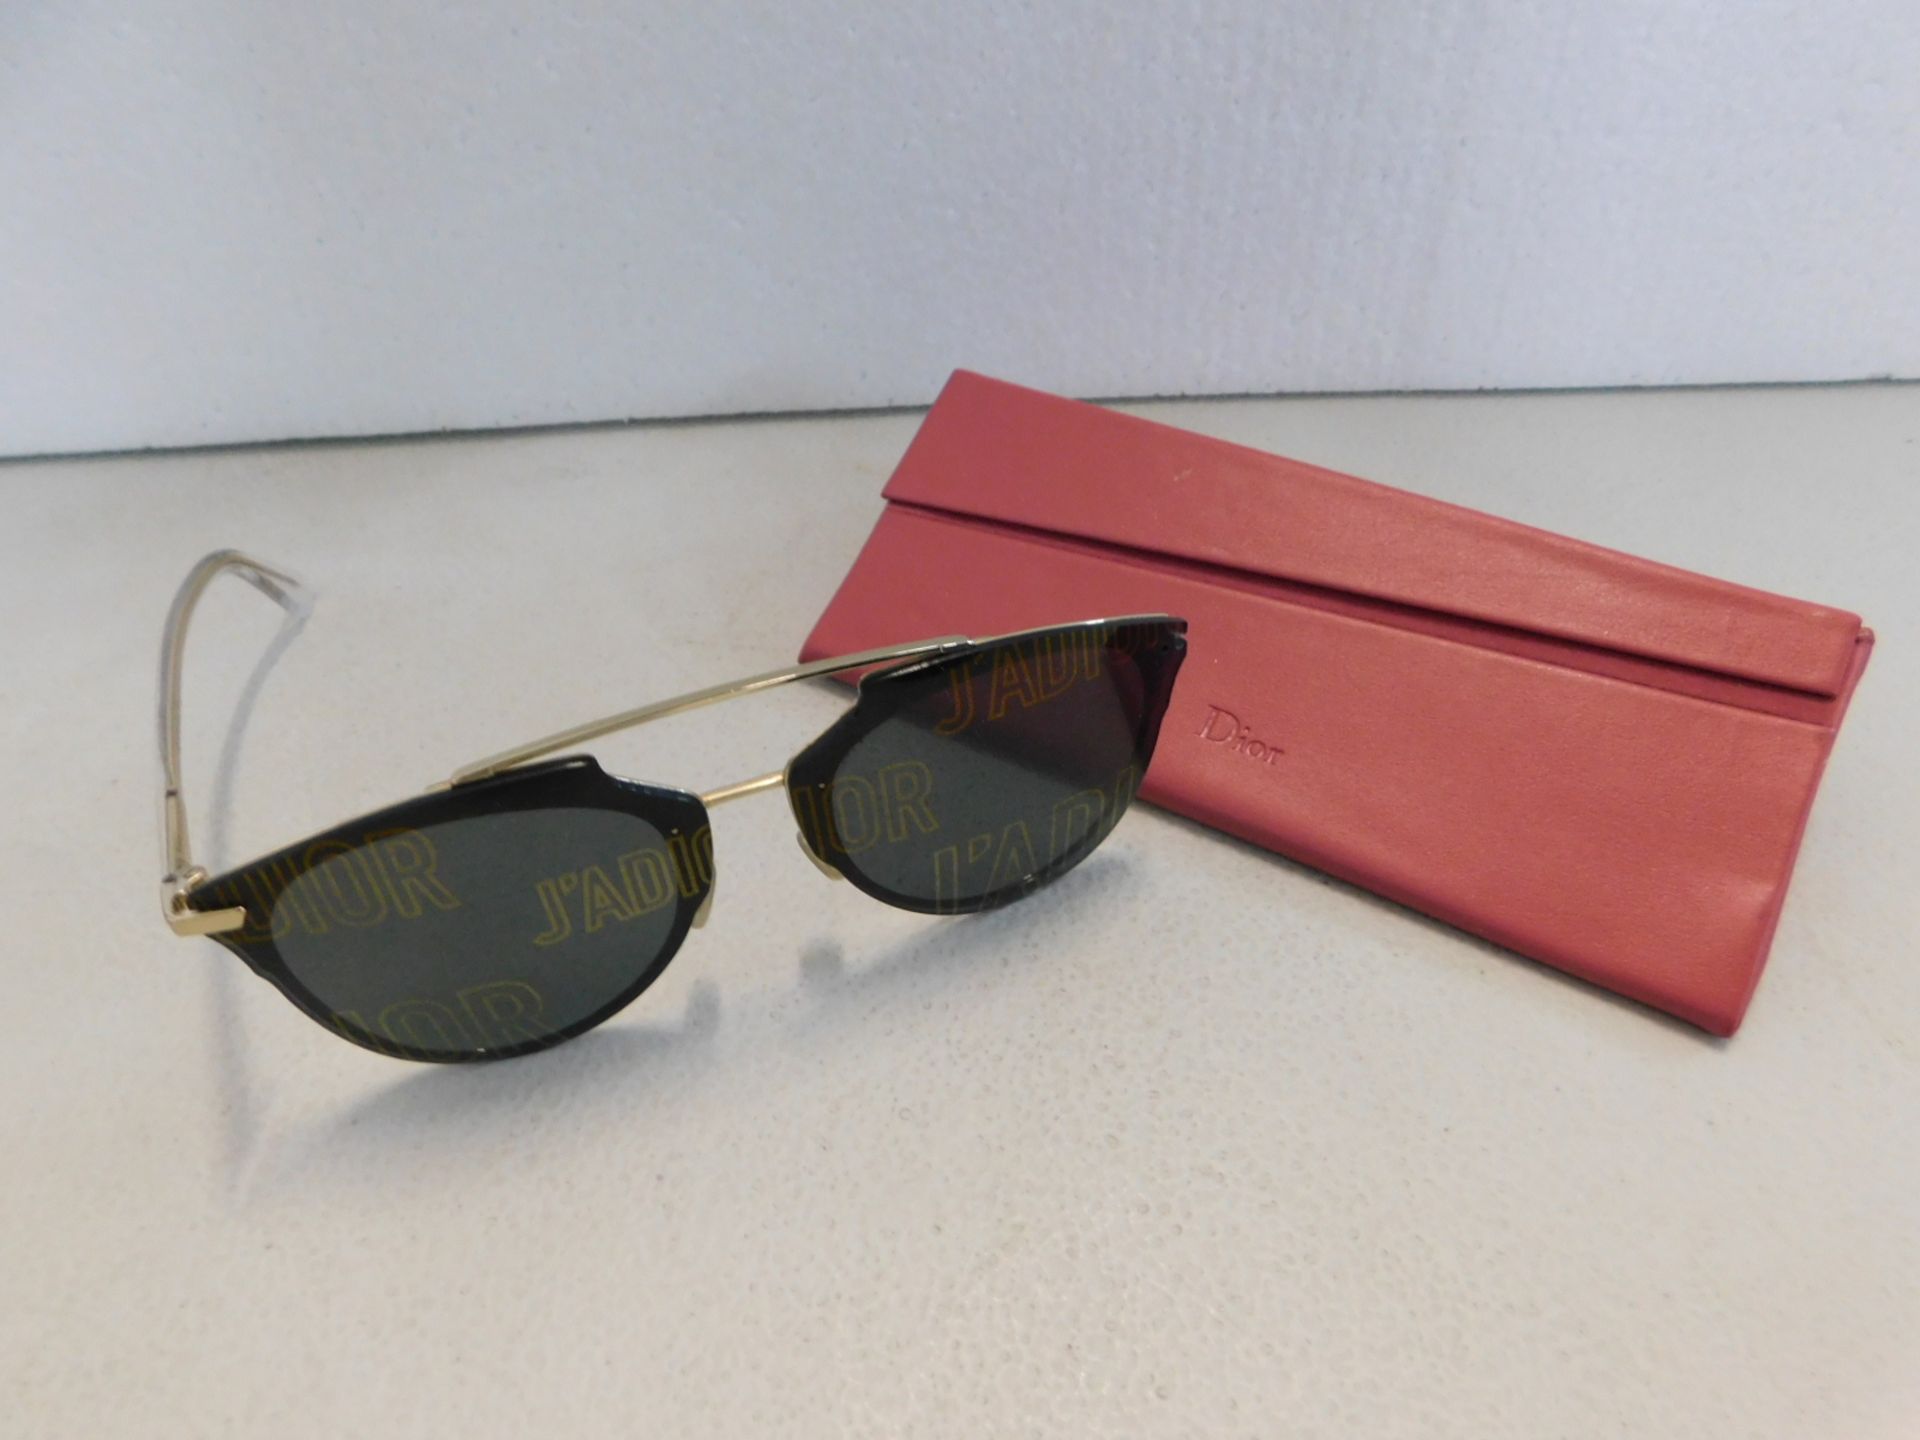 1 PAIR DIOR REFLECTED SUNGLASSES WITH CASE RRP Â£299 (MISSING 1 TEMPLE)